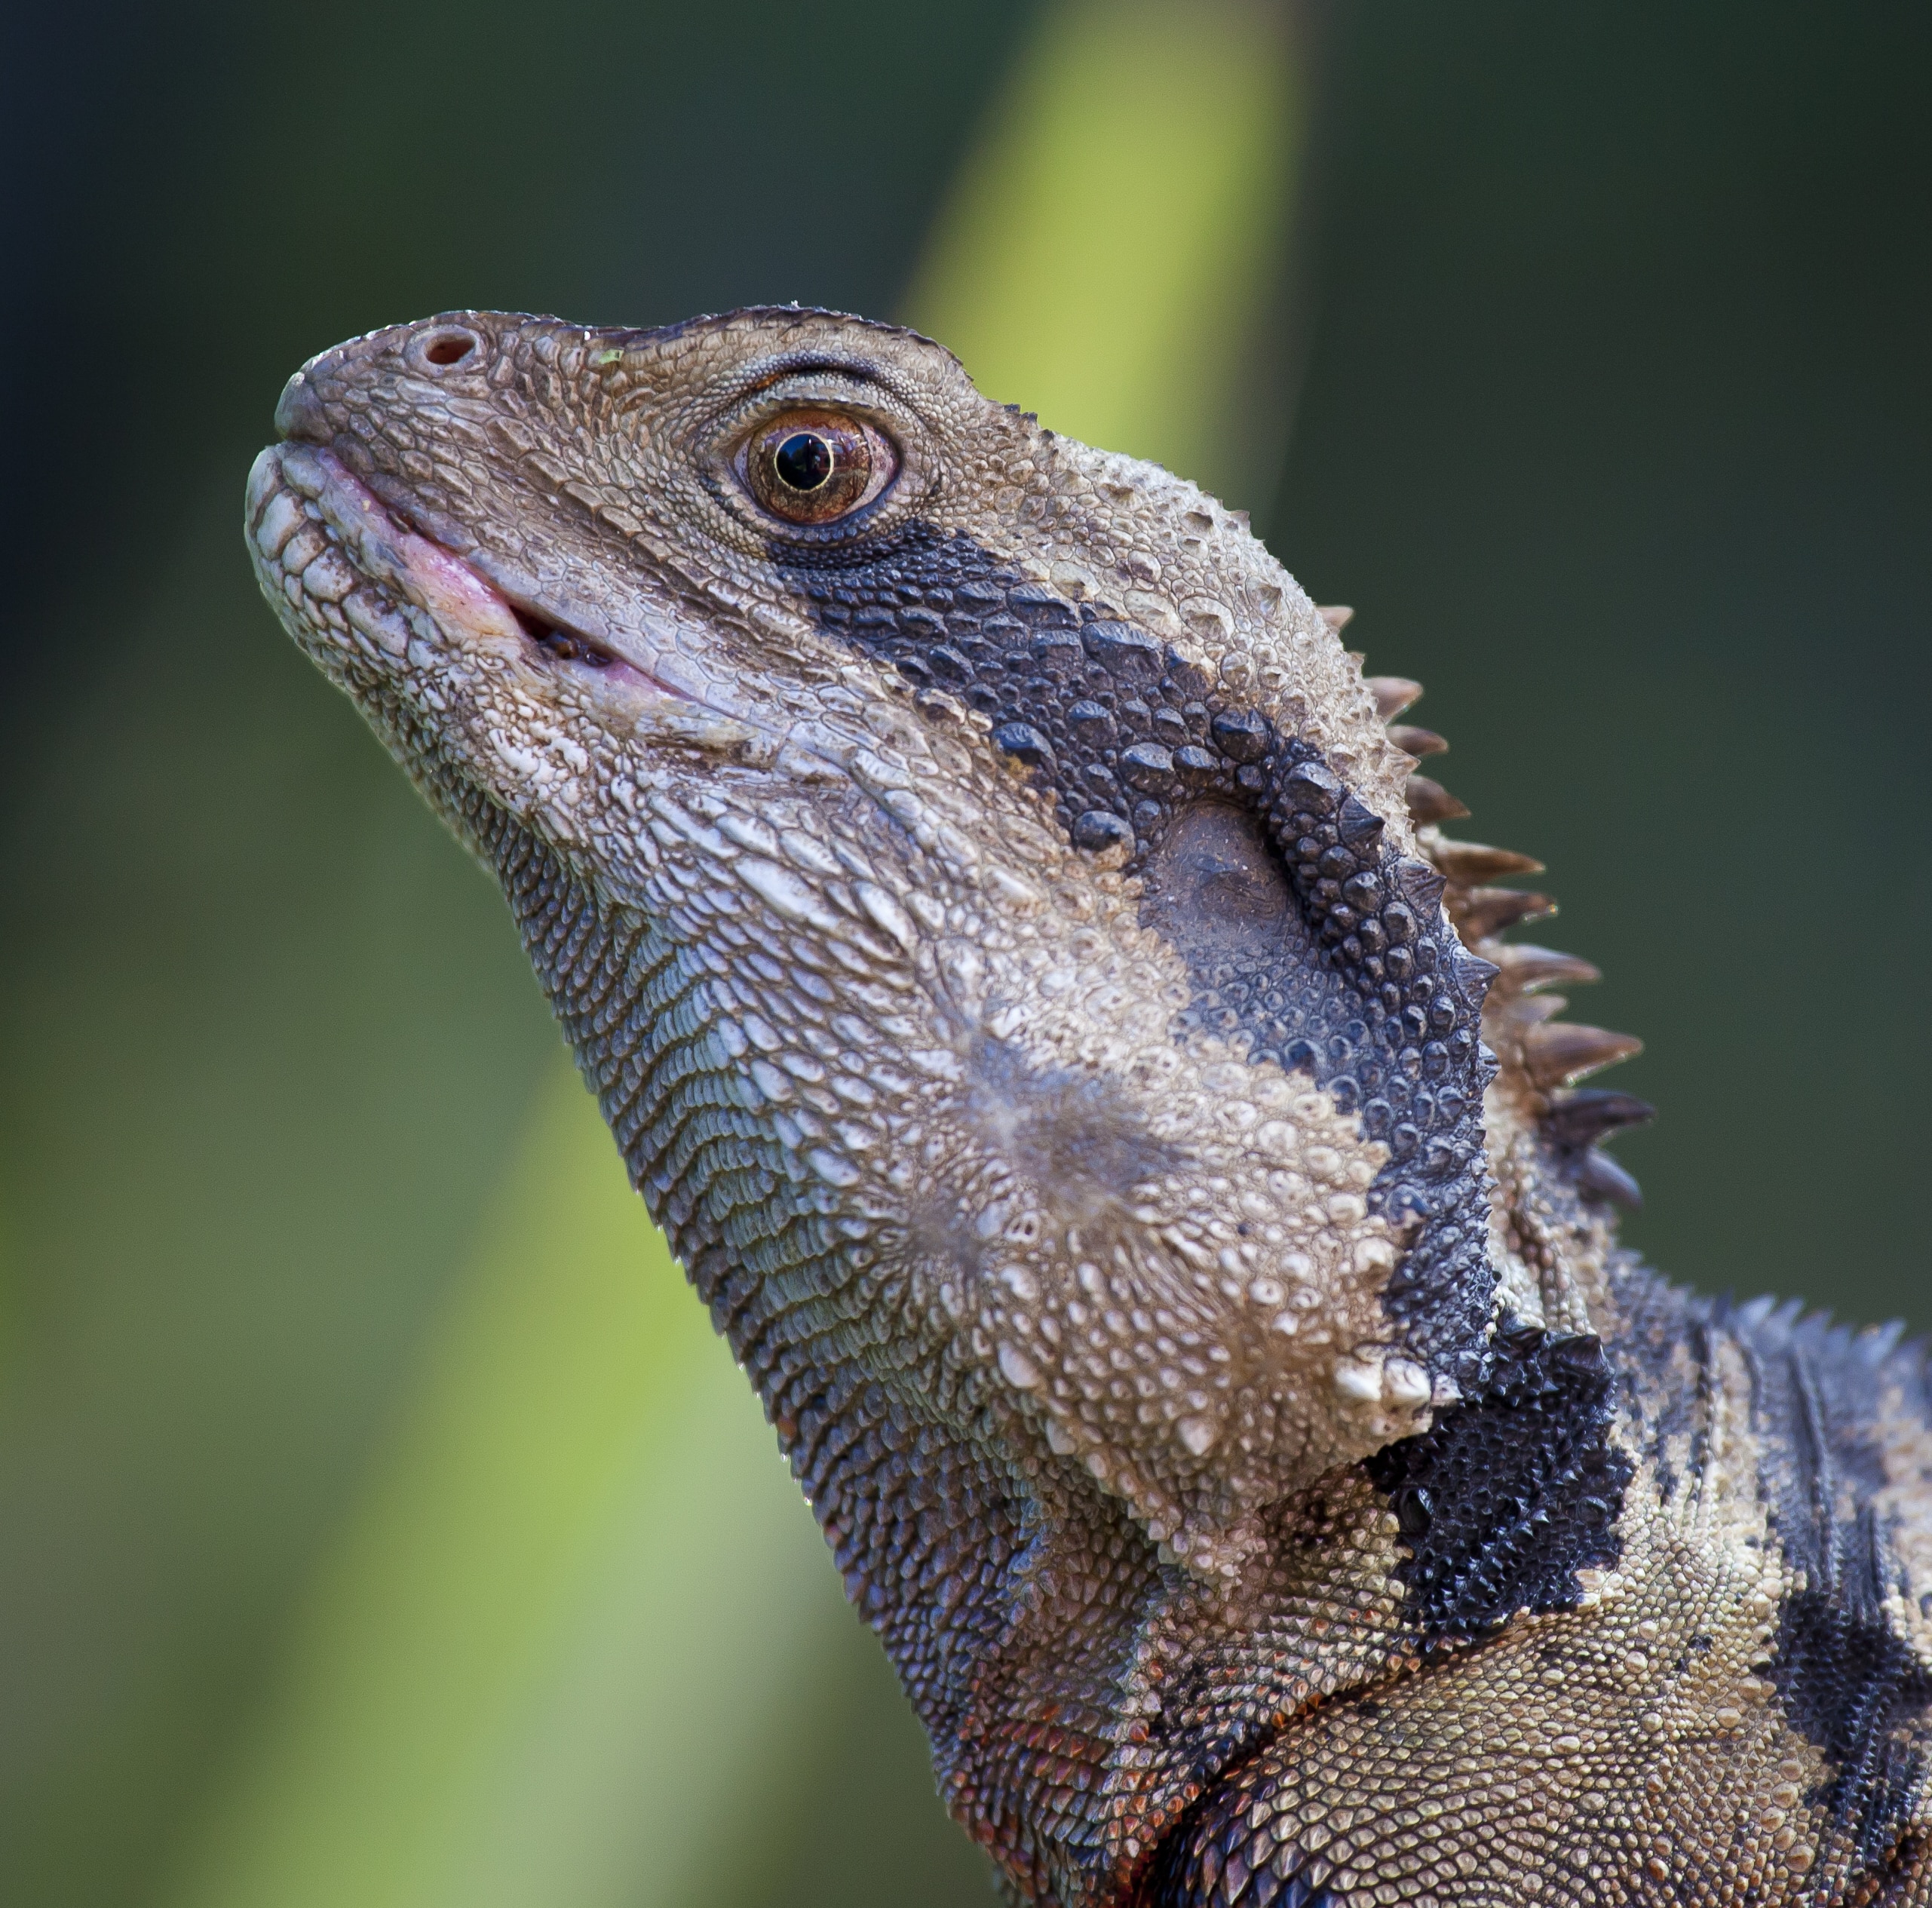 gray and black iguana in closeup photography